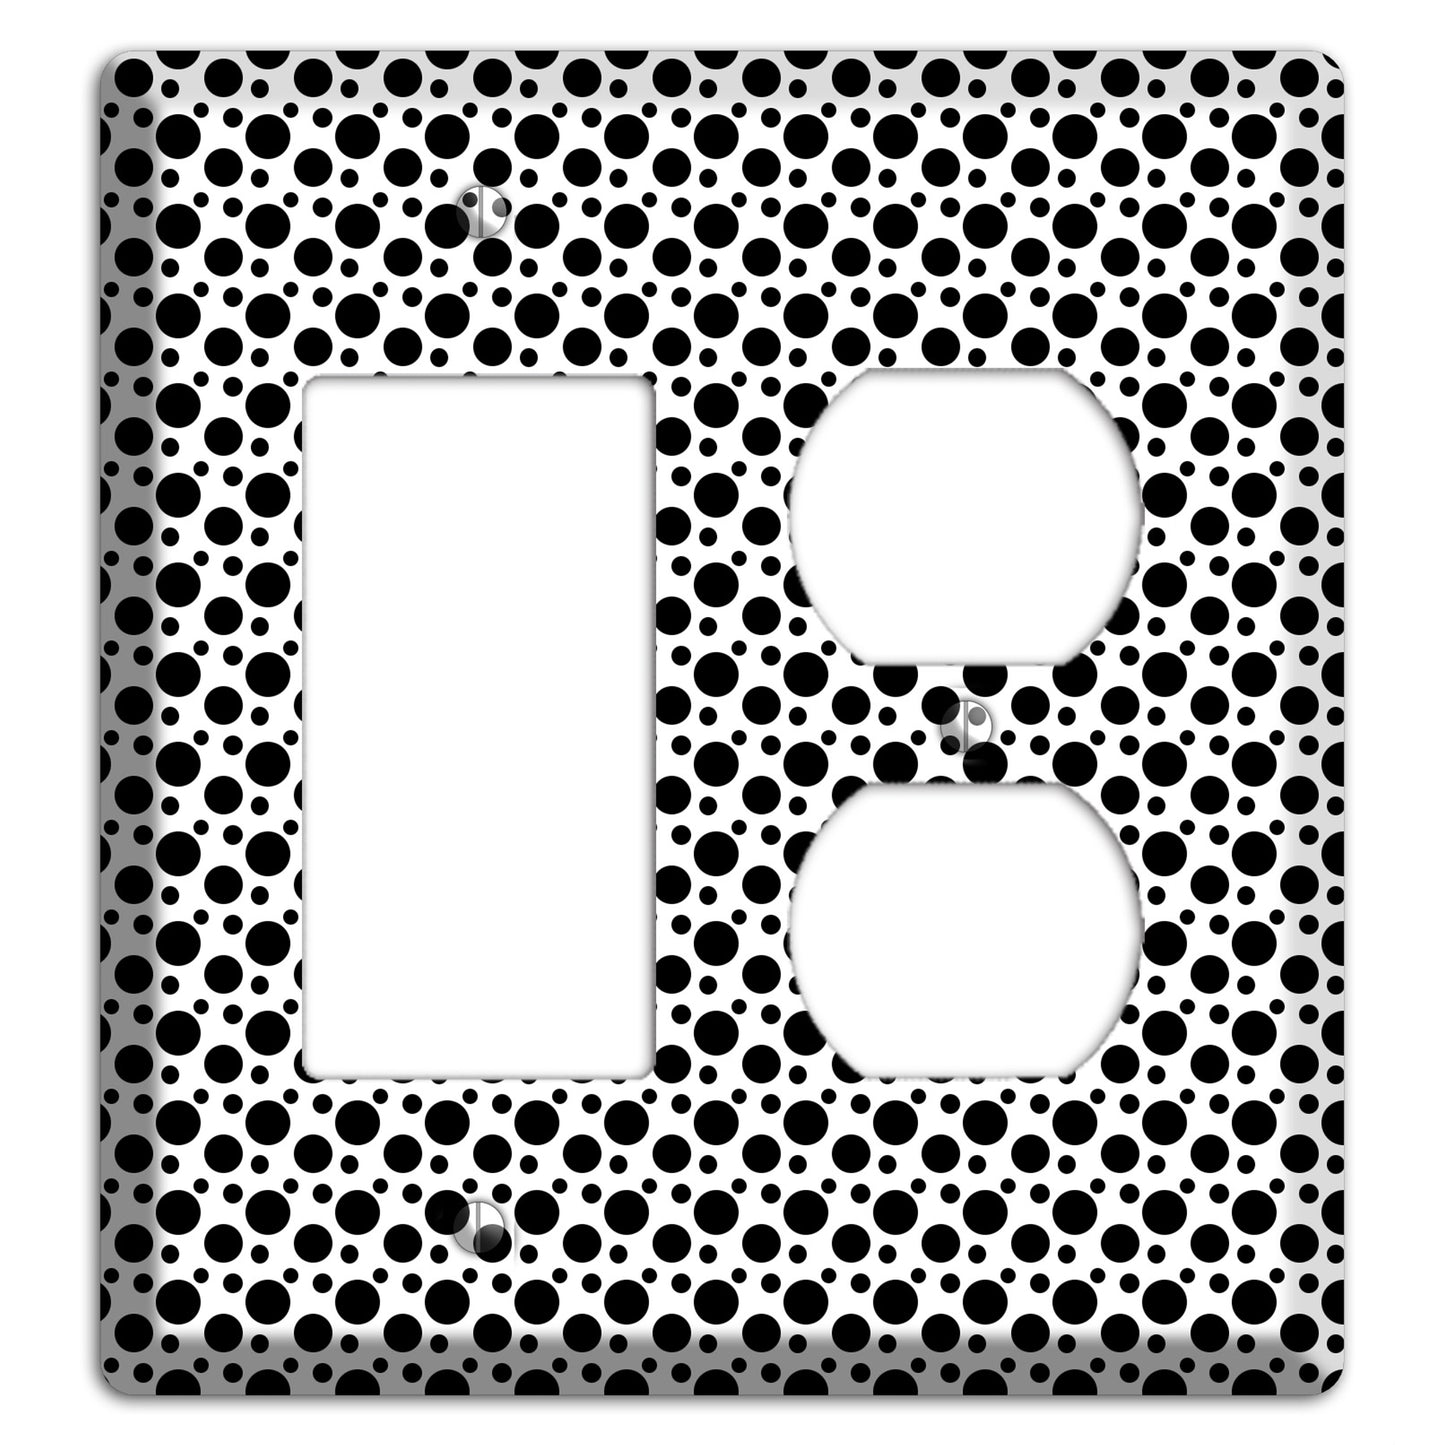 White with Black Small and Tiny Polka Dots Rocker / Duplex Wallplate